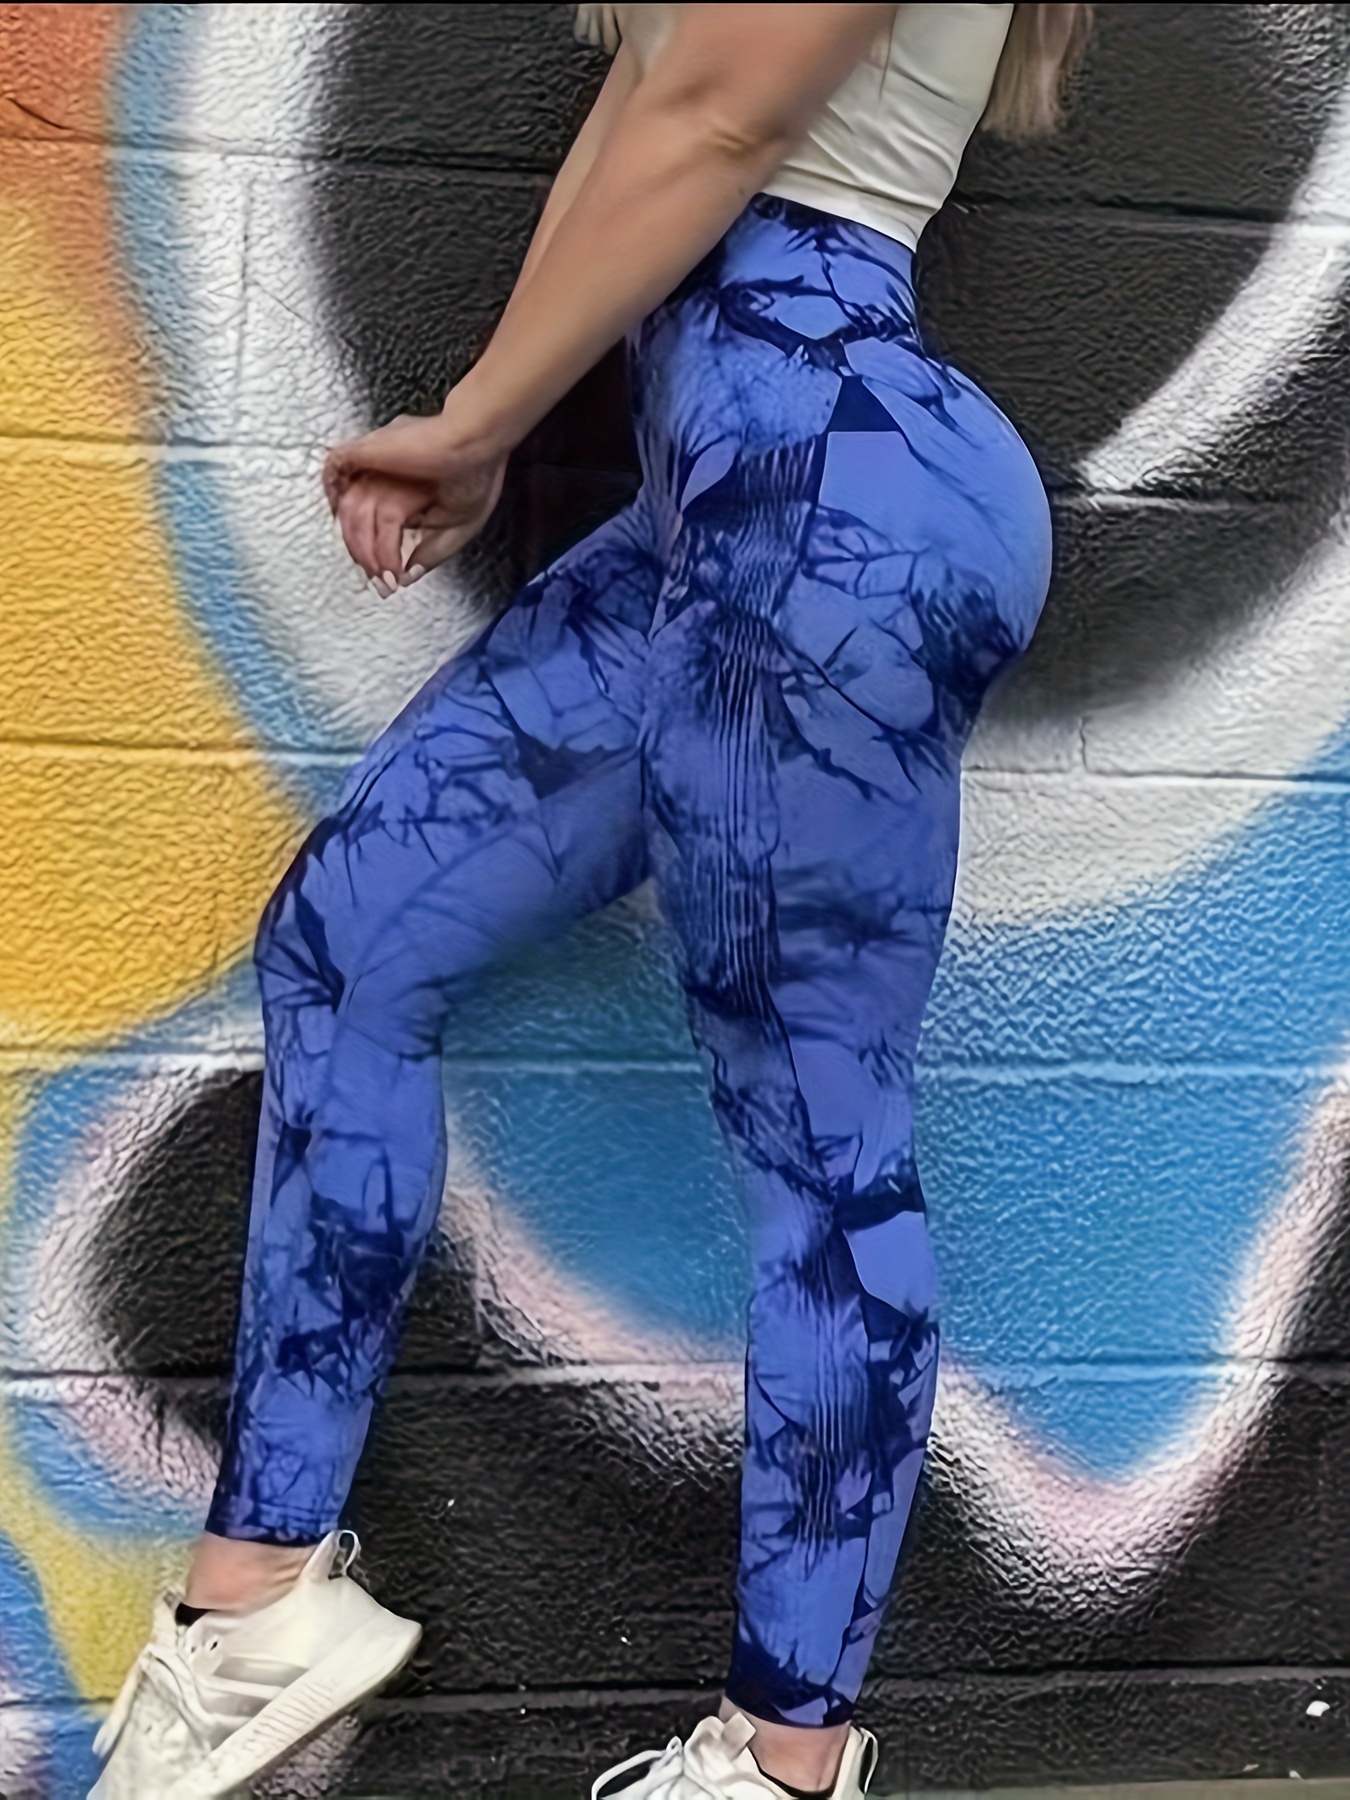 High Waist Tie Dye Yoga Leggings With Butt Lift And Tie Dyeing For Women  Elastic, Squat Proof, And Naked Feel Perfect For Running, Fitness, Gym, Or  Sports Style H1221 By NCLAGEN From